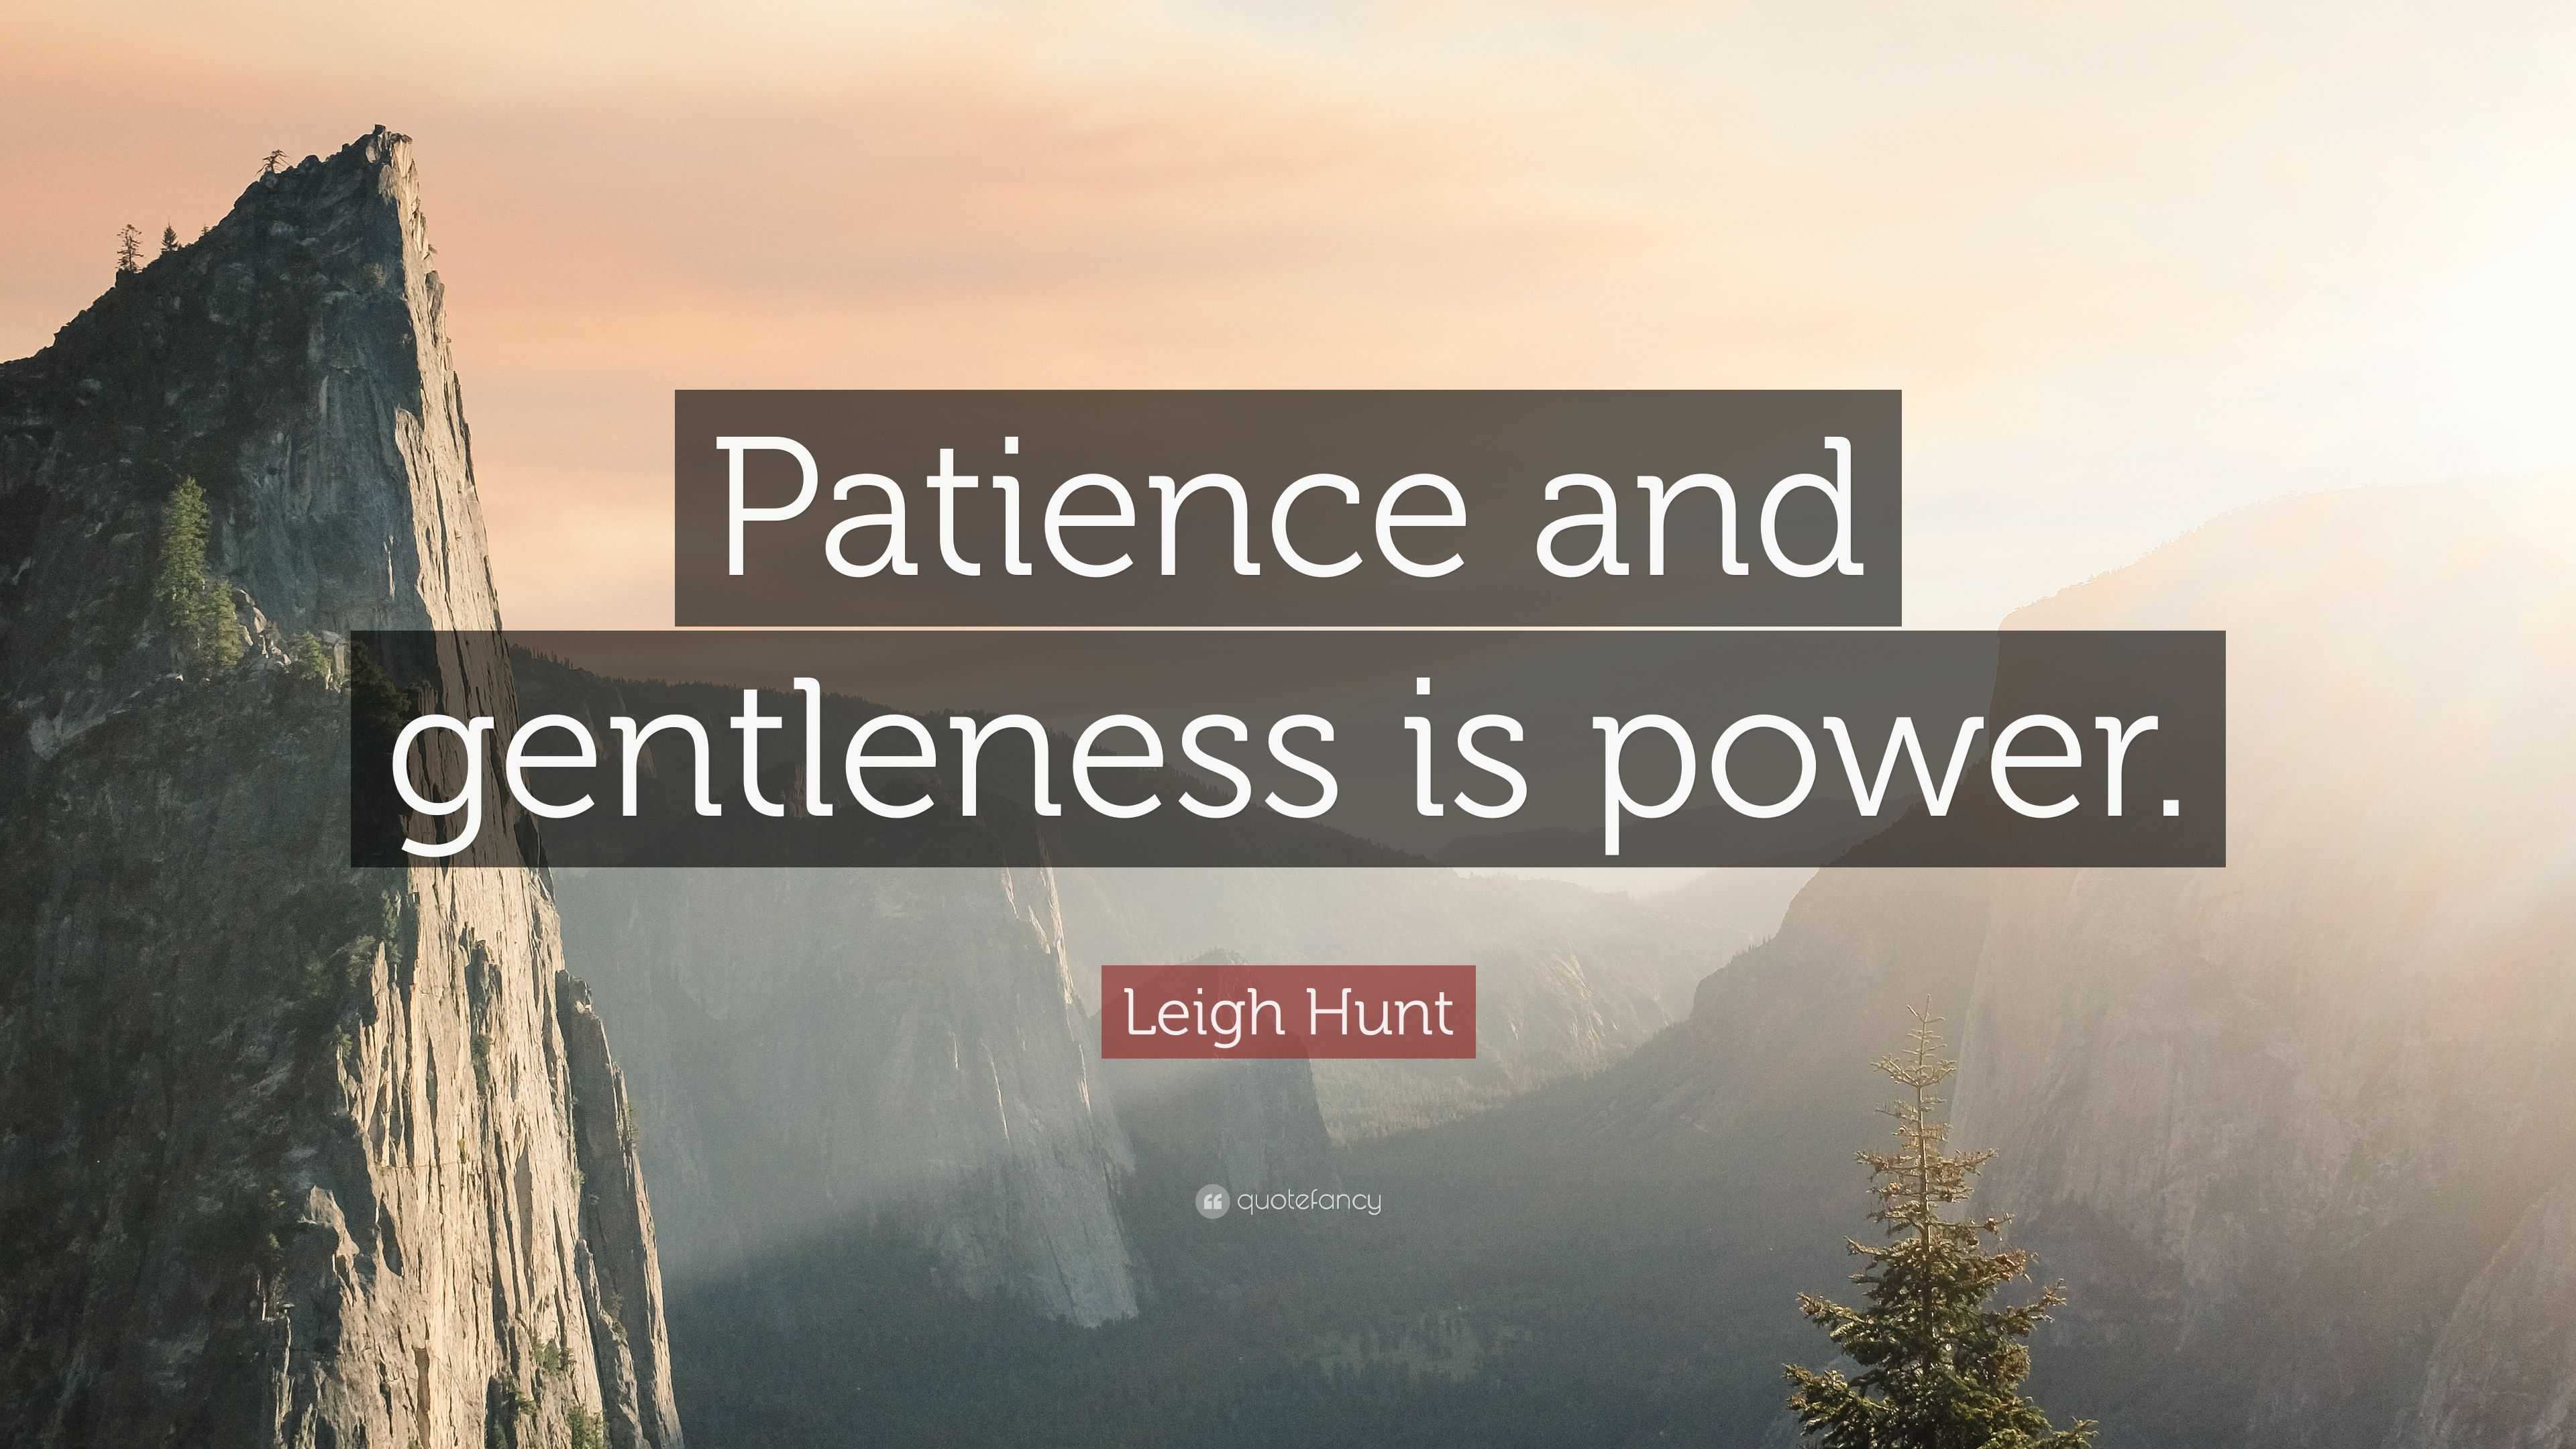 Leigh Hunt Quote: “Patience and gentleness is power.”